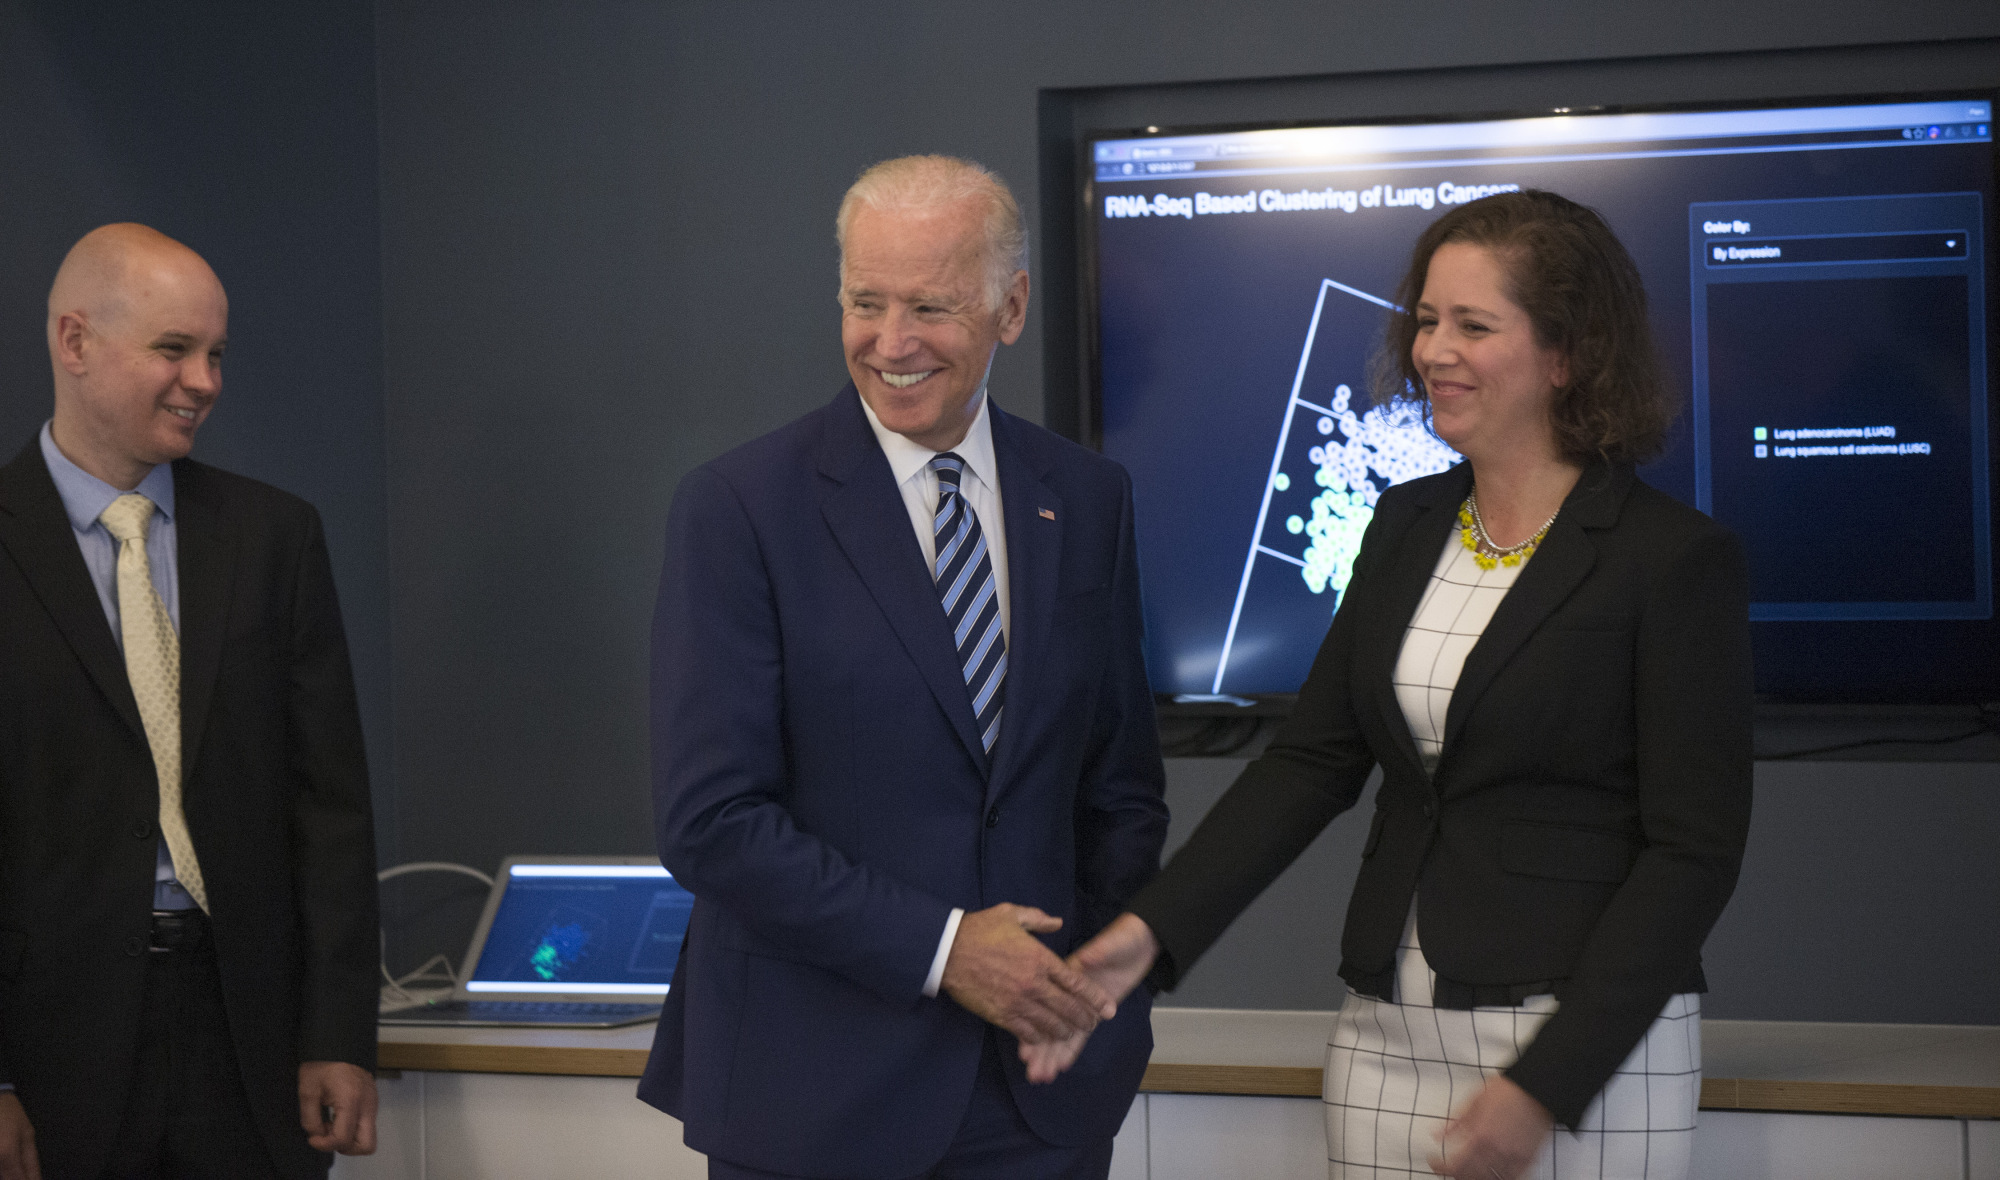 Vice President Joe Biden talks with Barbara Stranger, PhD and Piers Nash, PhD (left) during the GDC tour. (Photo by Robert Kozloff; source: Genomic Data Commons at UChicago heralds new era of data sharing for cancer research)